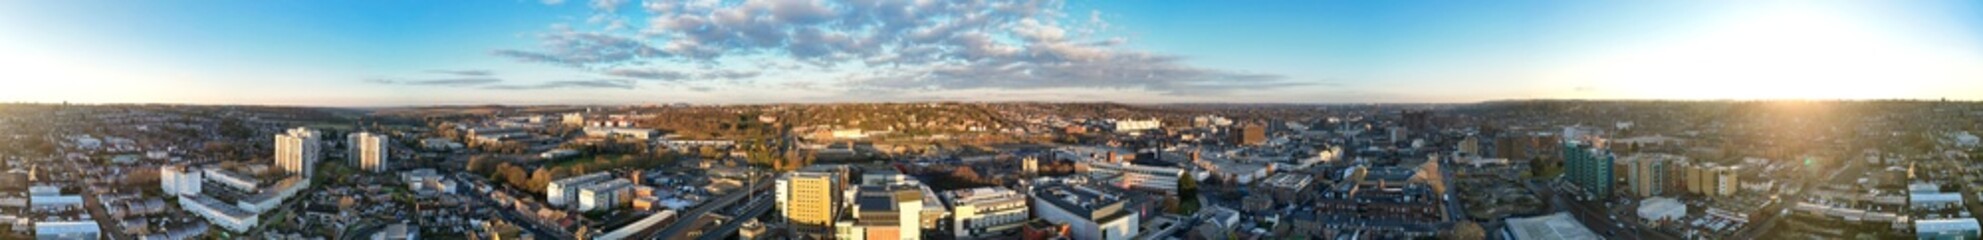 Fototapeta na wymiar Aerial view of Central Luton City of England During Sunset Time